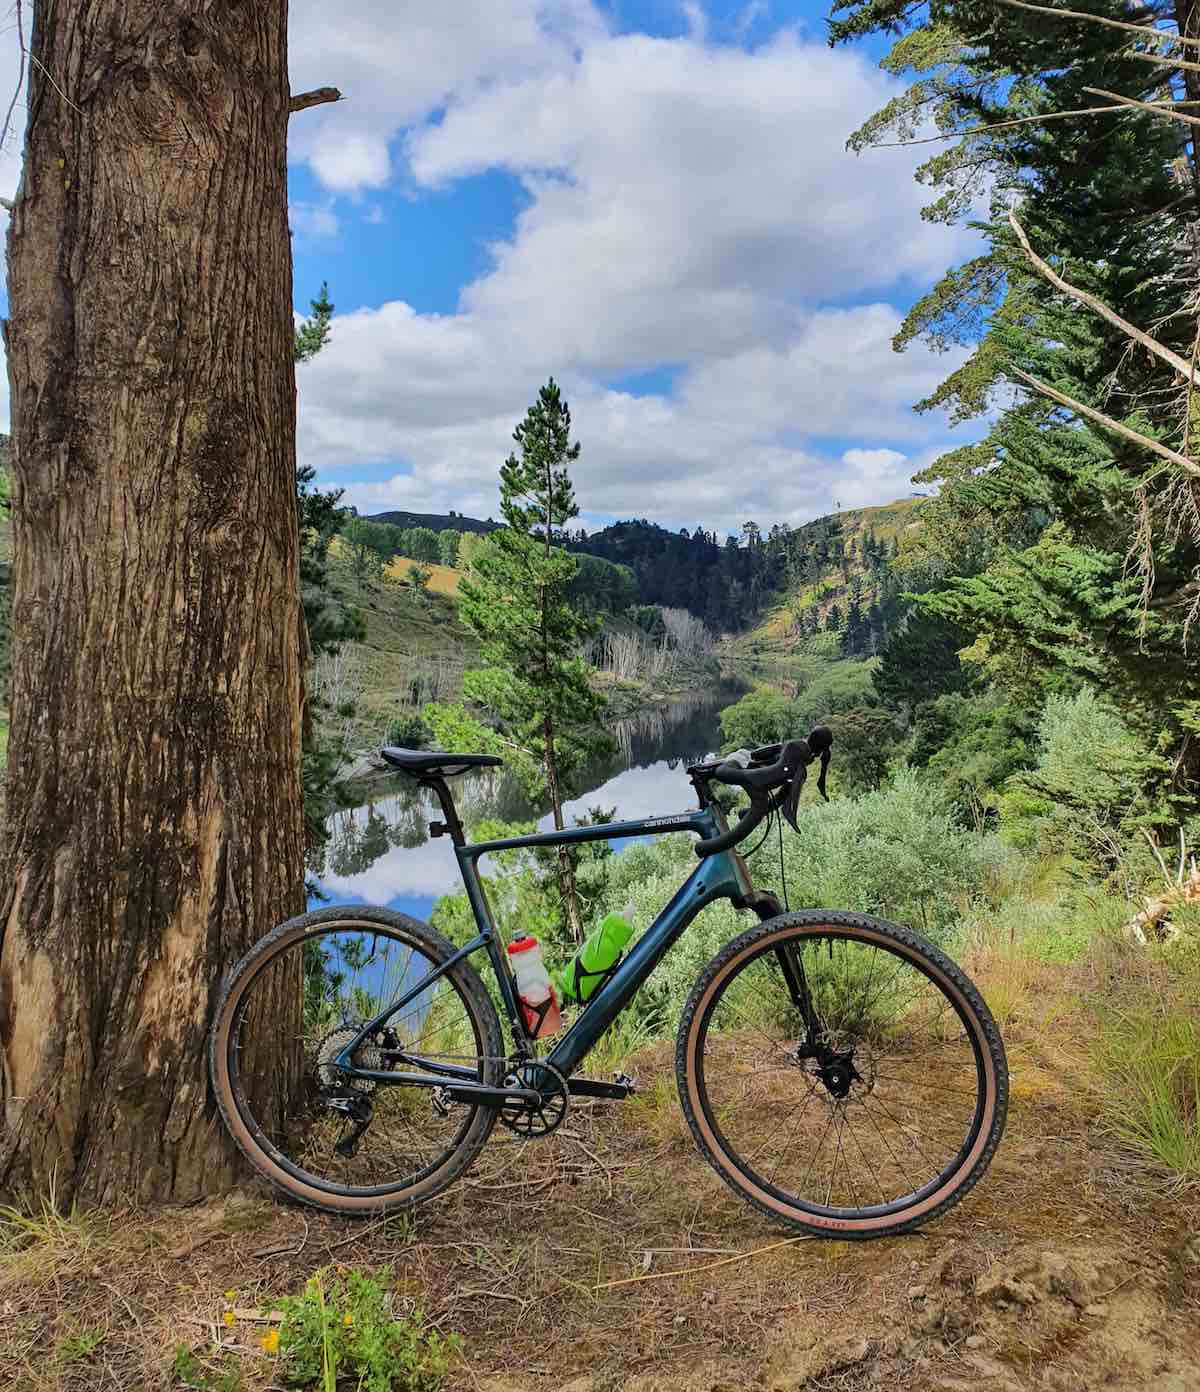 bikerumor pic of the day cannondale topstone gravel bike in Whanganui new zealand leaning against a large pine tree on a dirt trail among pine tree forest and a stream reflecting the blue sky and clouds.